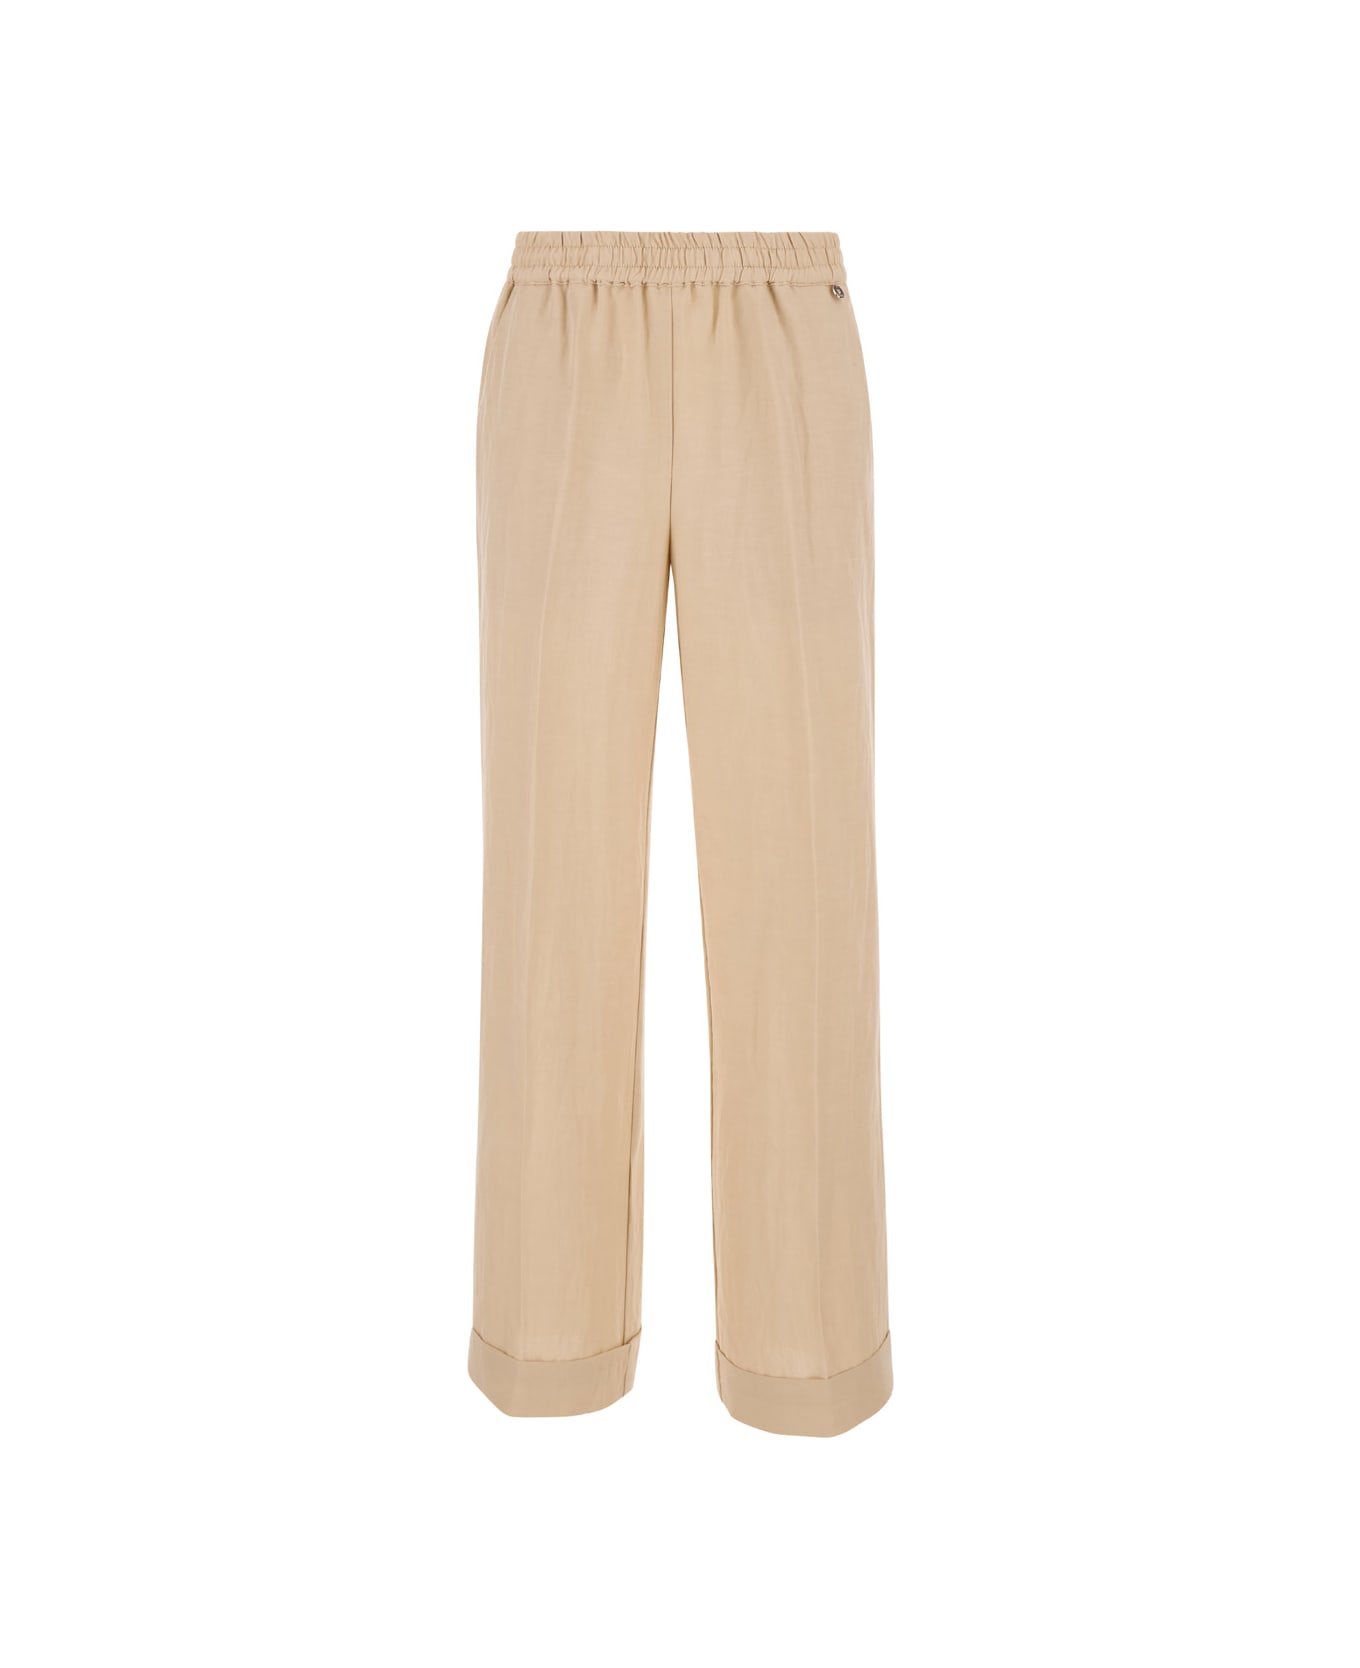 Liu-Jo Pink Trousers With Elastic Waistband In Linen Blend Woman - Beige ボトムス